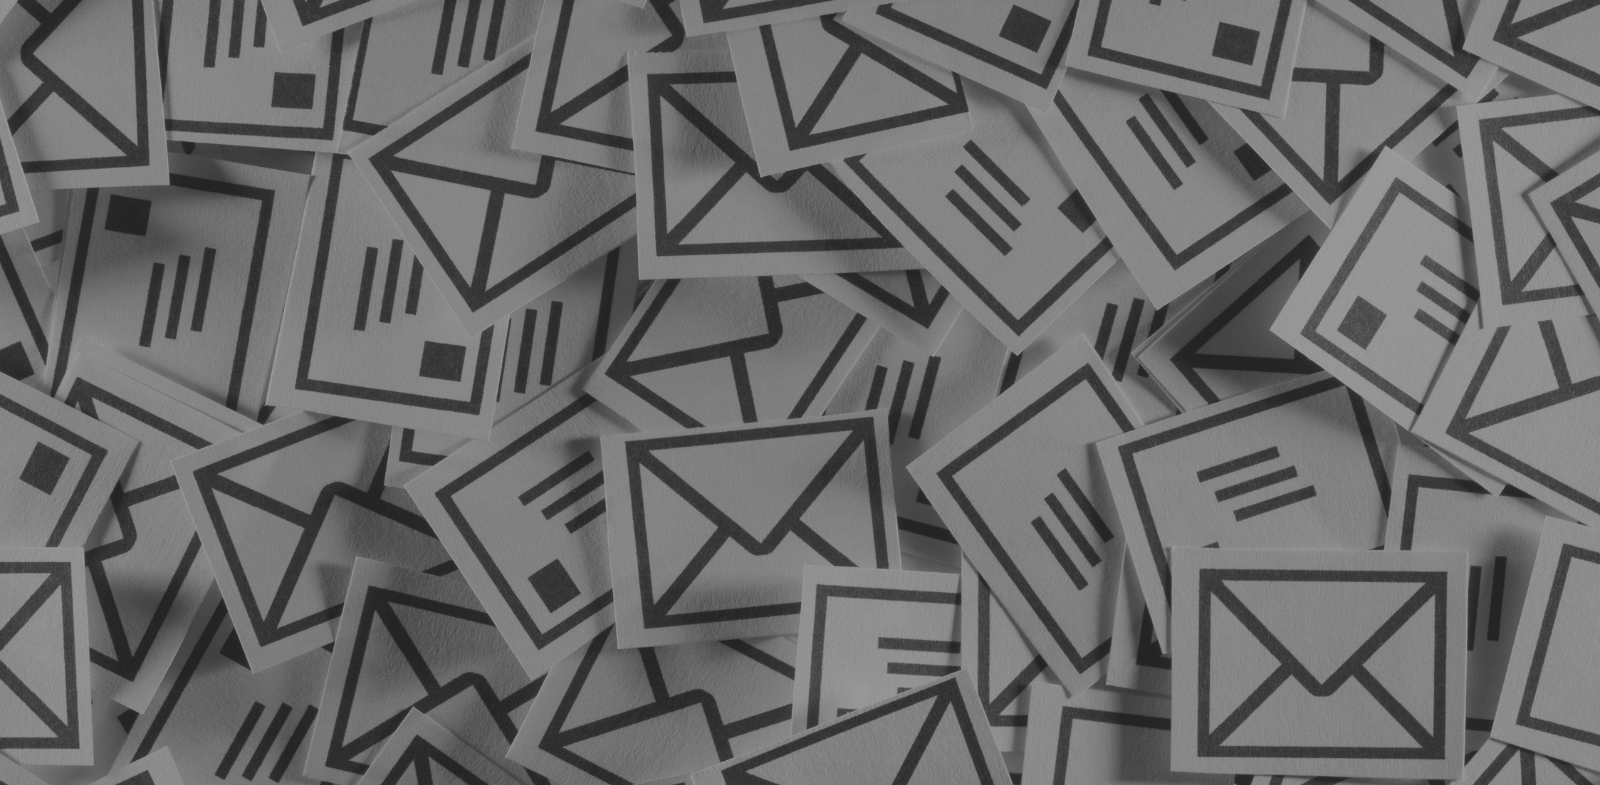 paper cut outs of email and envelope icons. concept of spam